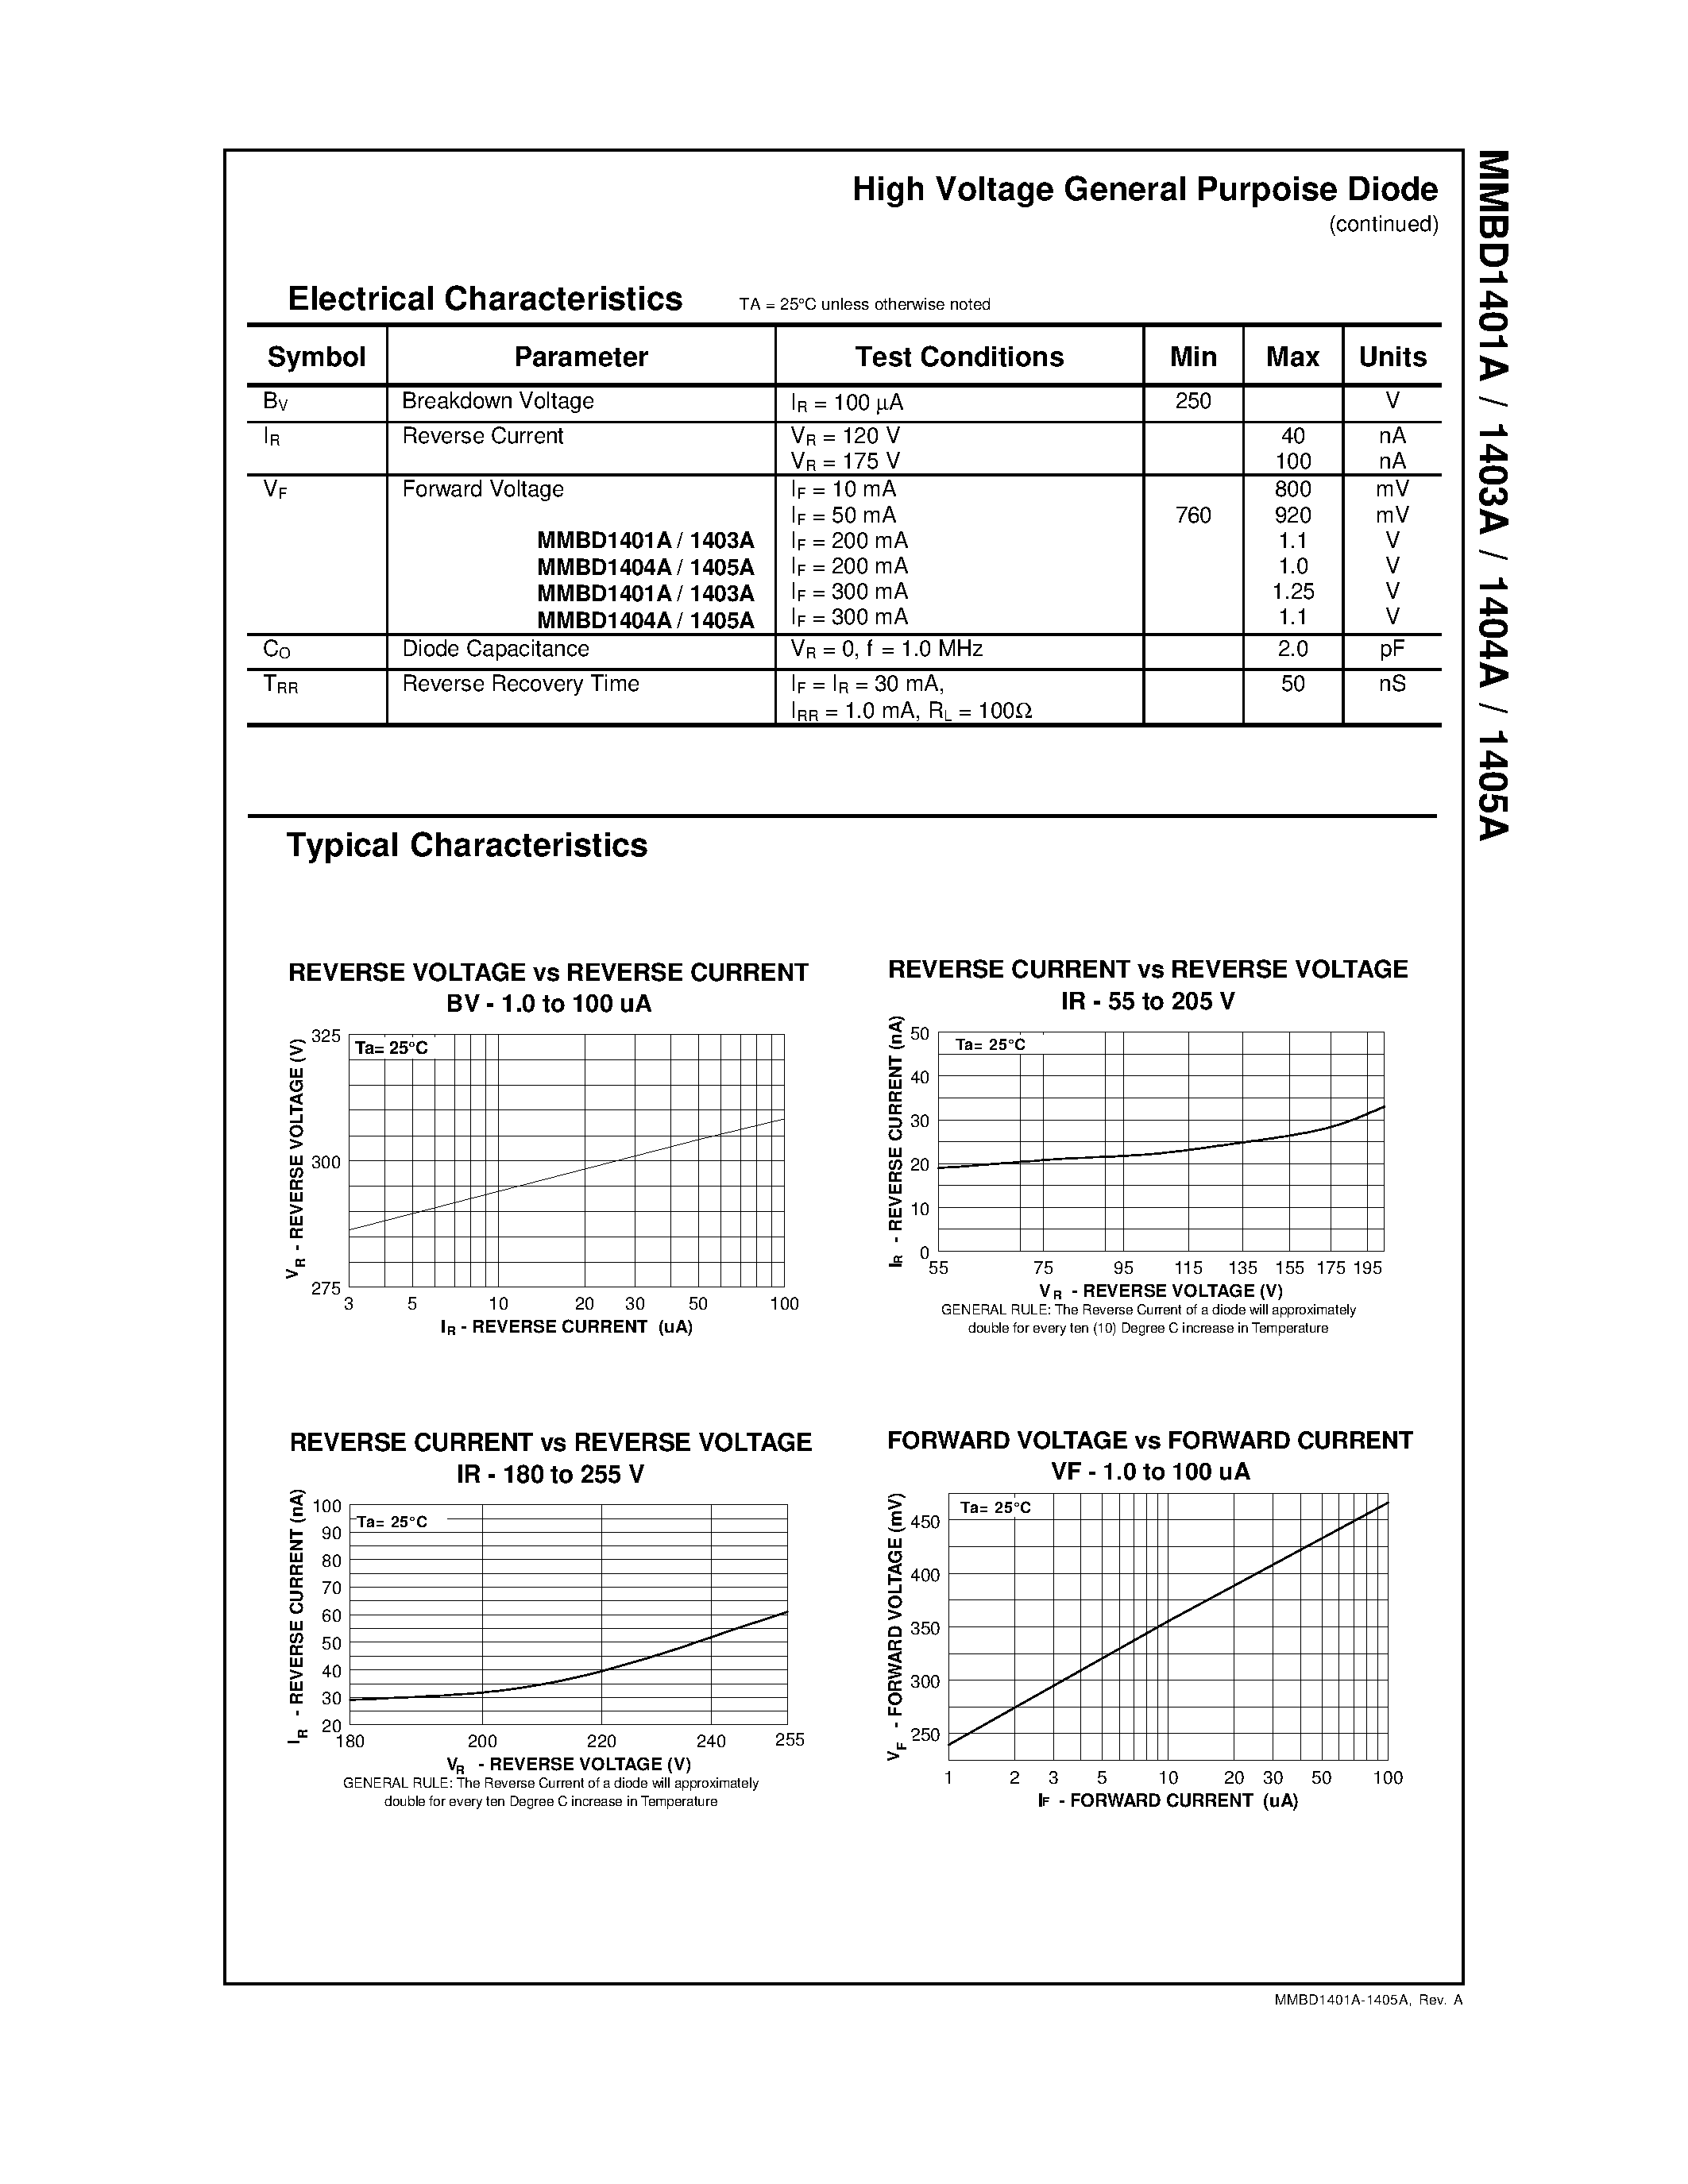 Datasheet MMBD1401A - High Voltage General Purpose Diode page 2